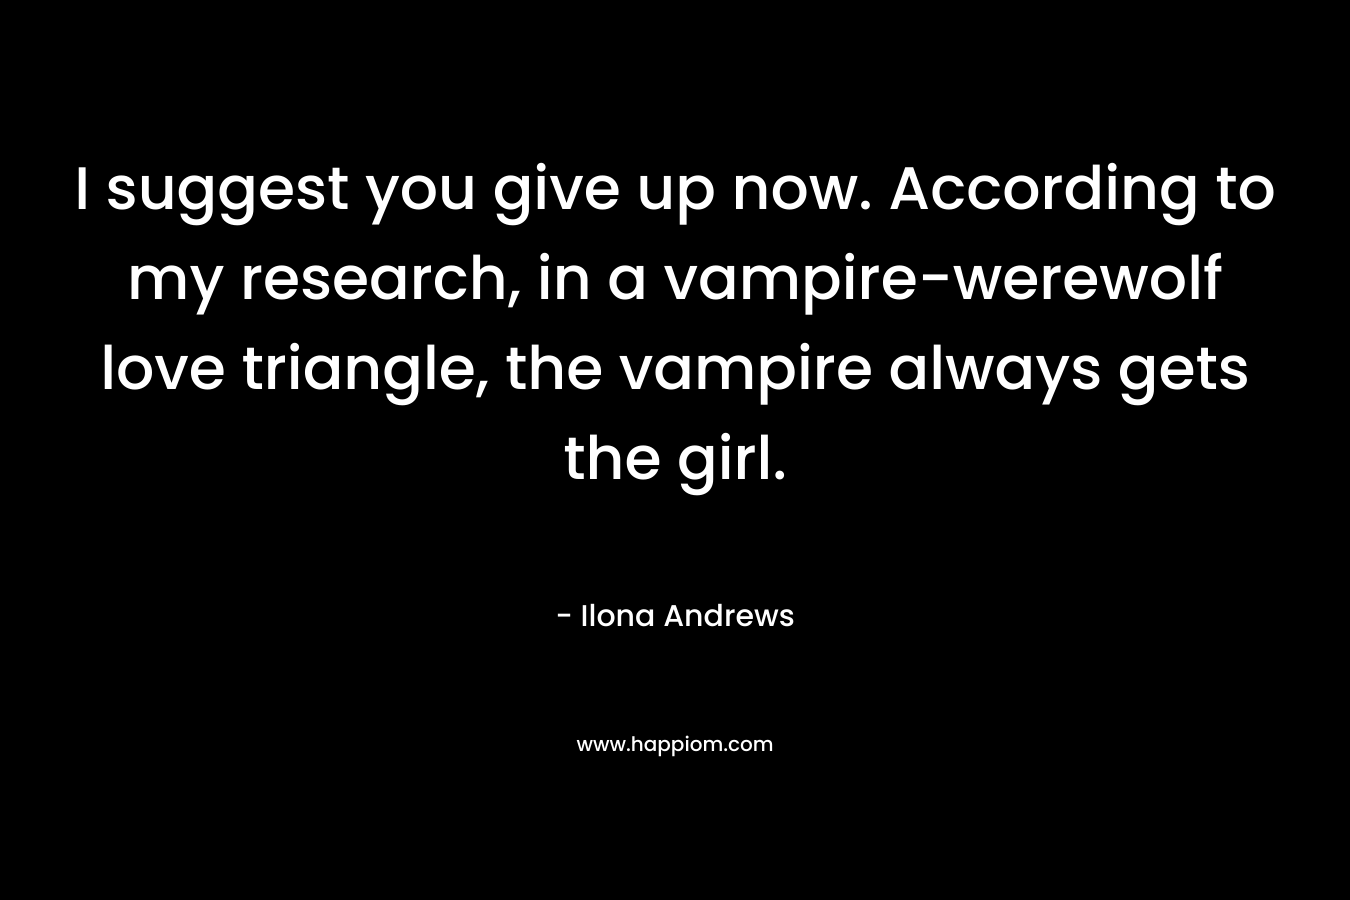 I suggest you give up now. According to my research, in a vampire-werewolf love triangle, the vampire always gets the girl. – Ilona Andrews